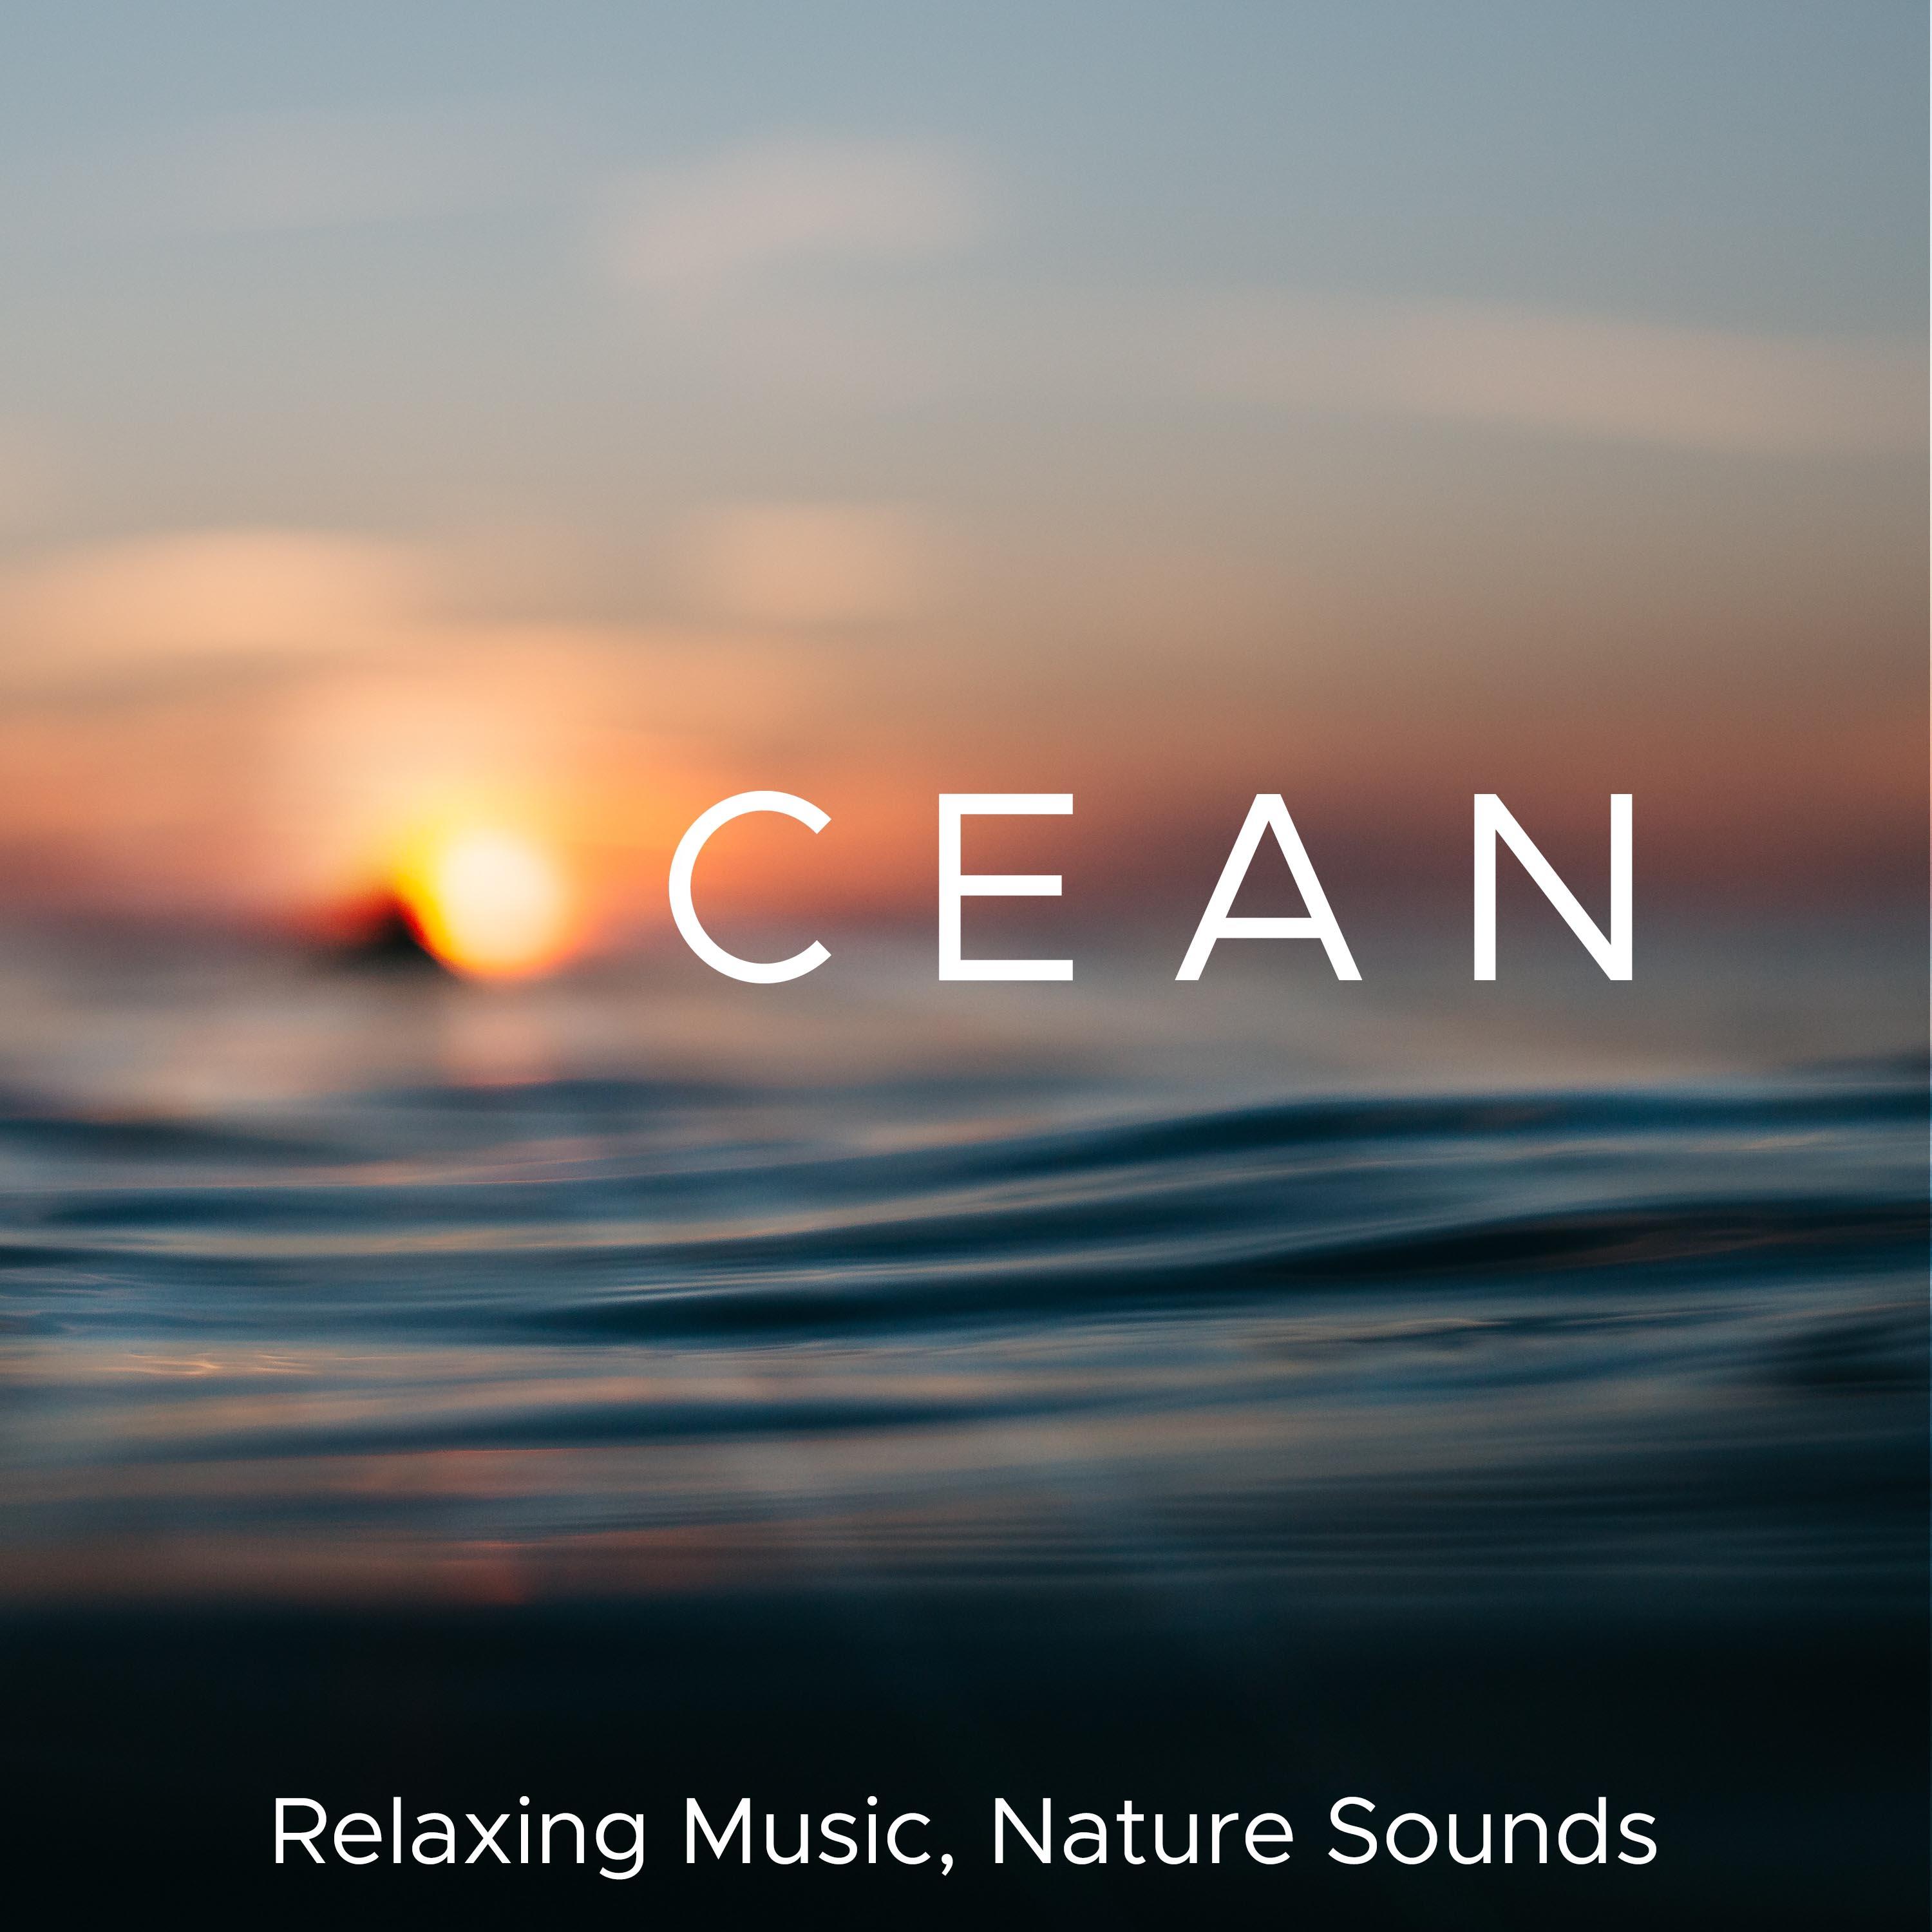 Ocean - Relaxing Music, Nature Sounds, Soothing Piano Music, Relax your Eyes, Body & Mind